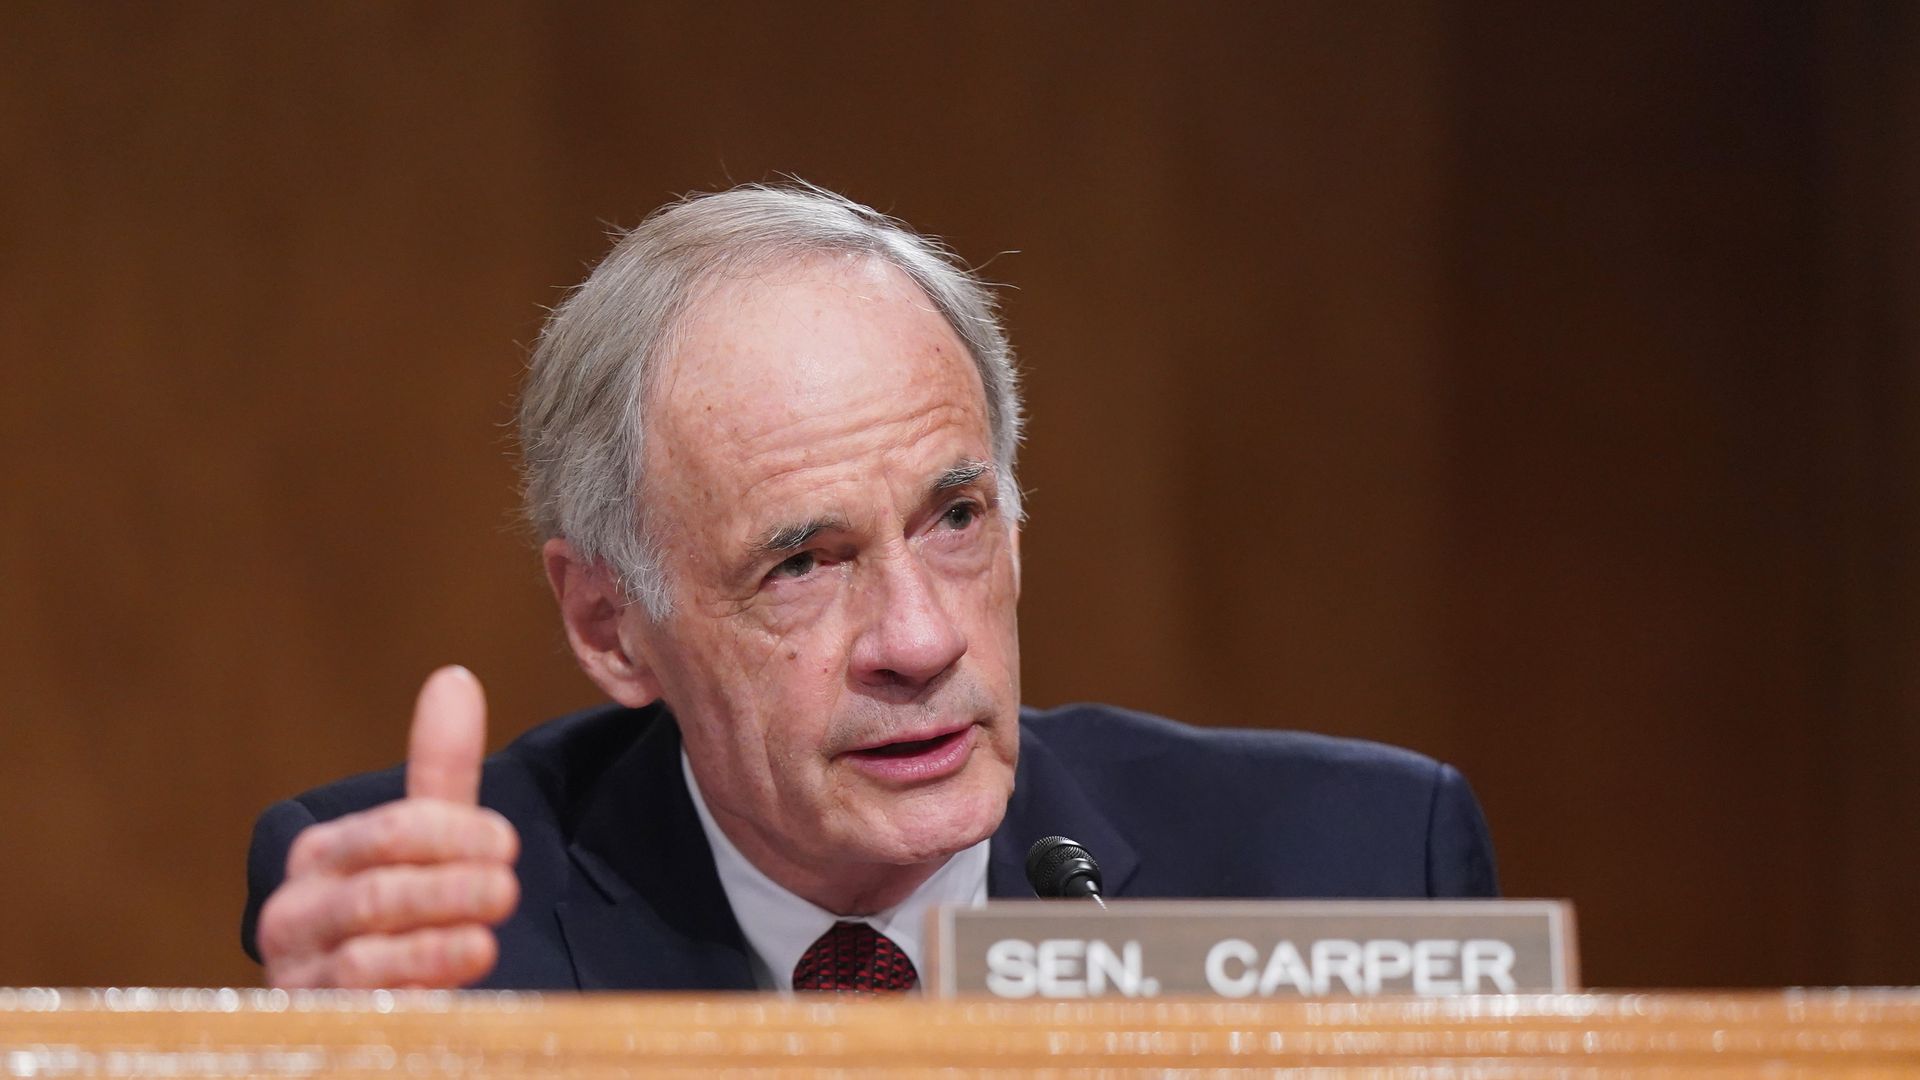 Sen. Tom Carper is seen speaking during a congressional hearing.